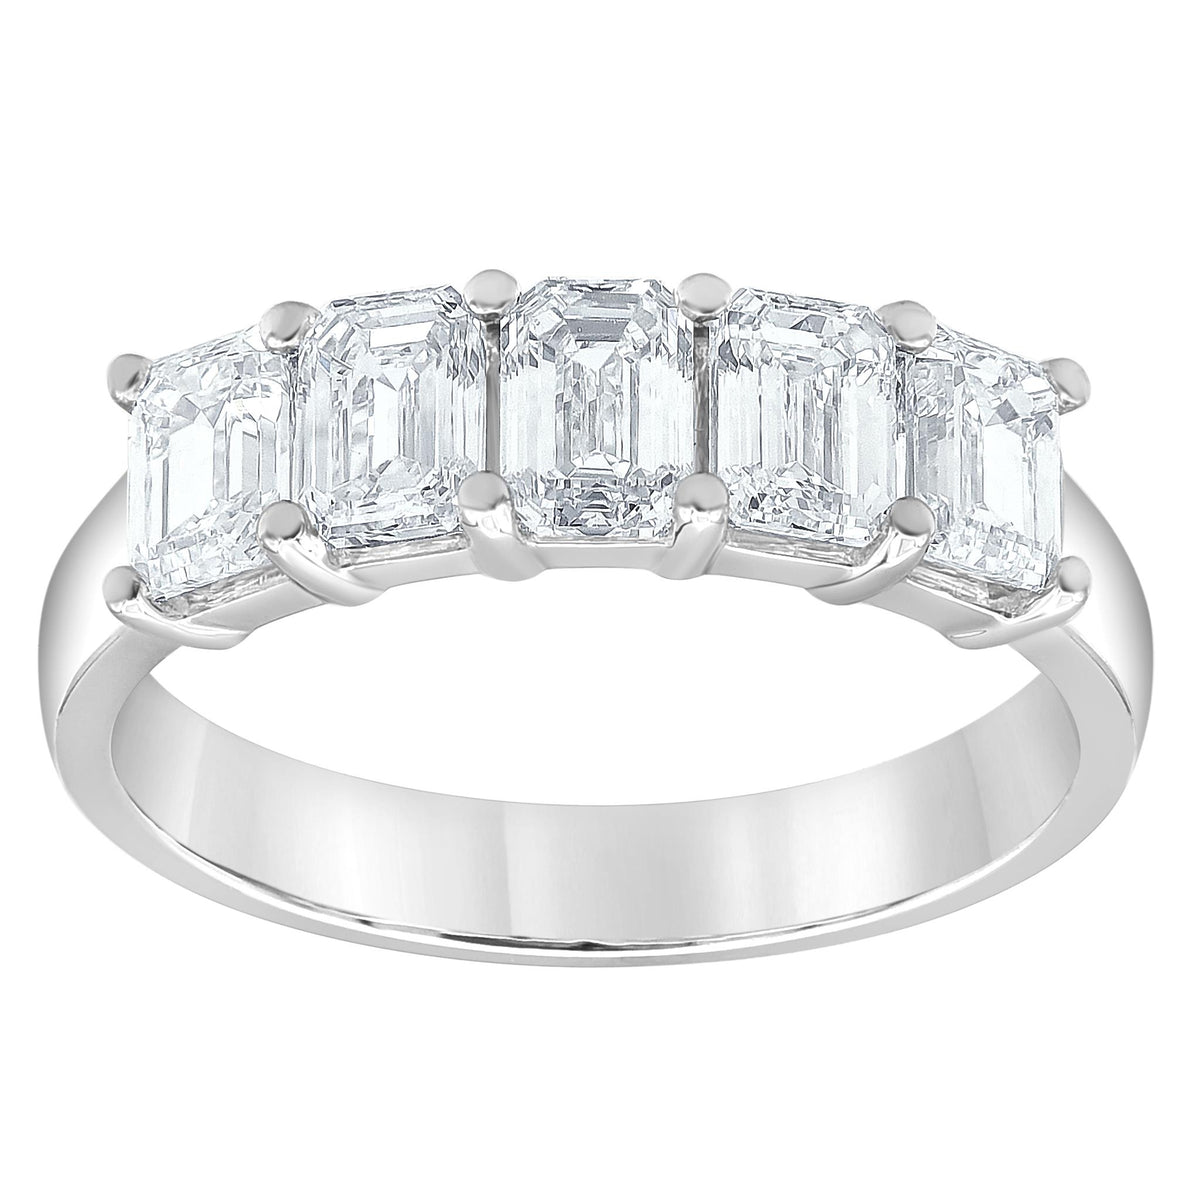 14Kt White Gold Prong Set Wedding Ring With 2.00cttw Lab-Grown Diamonds